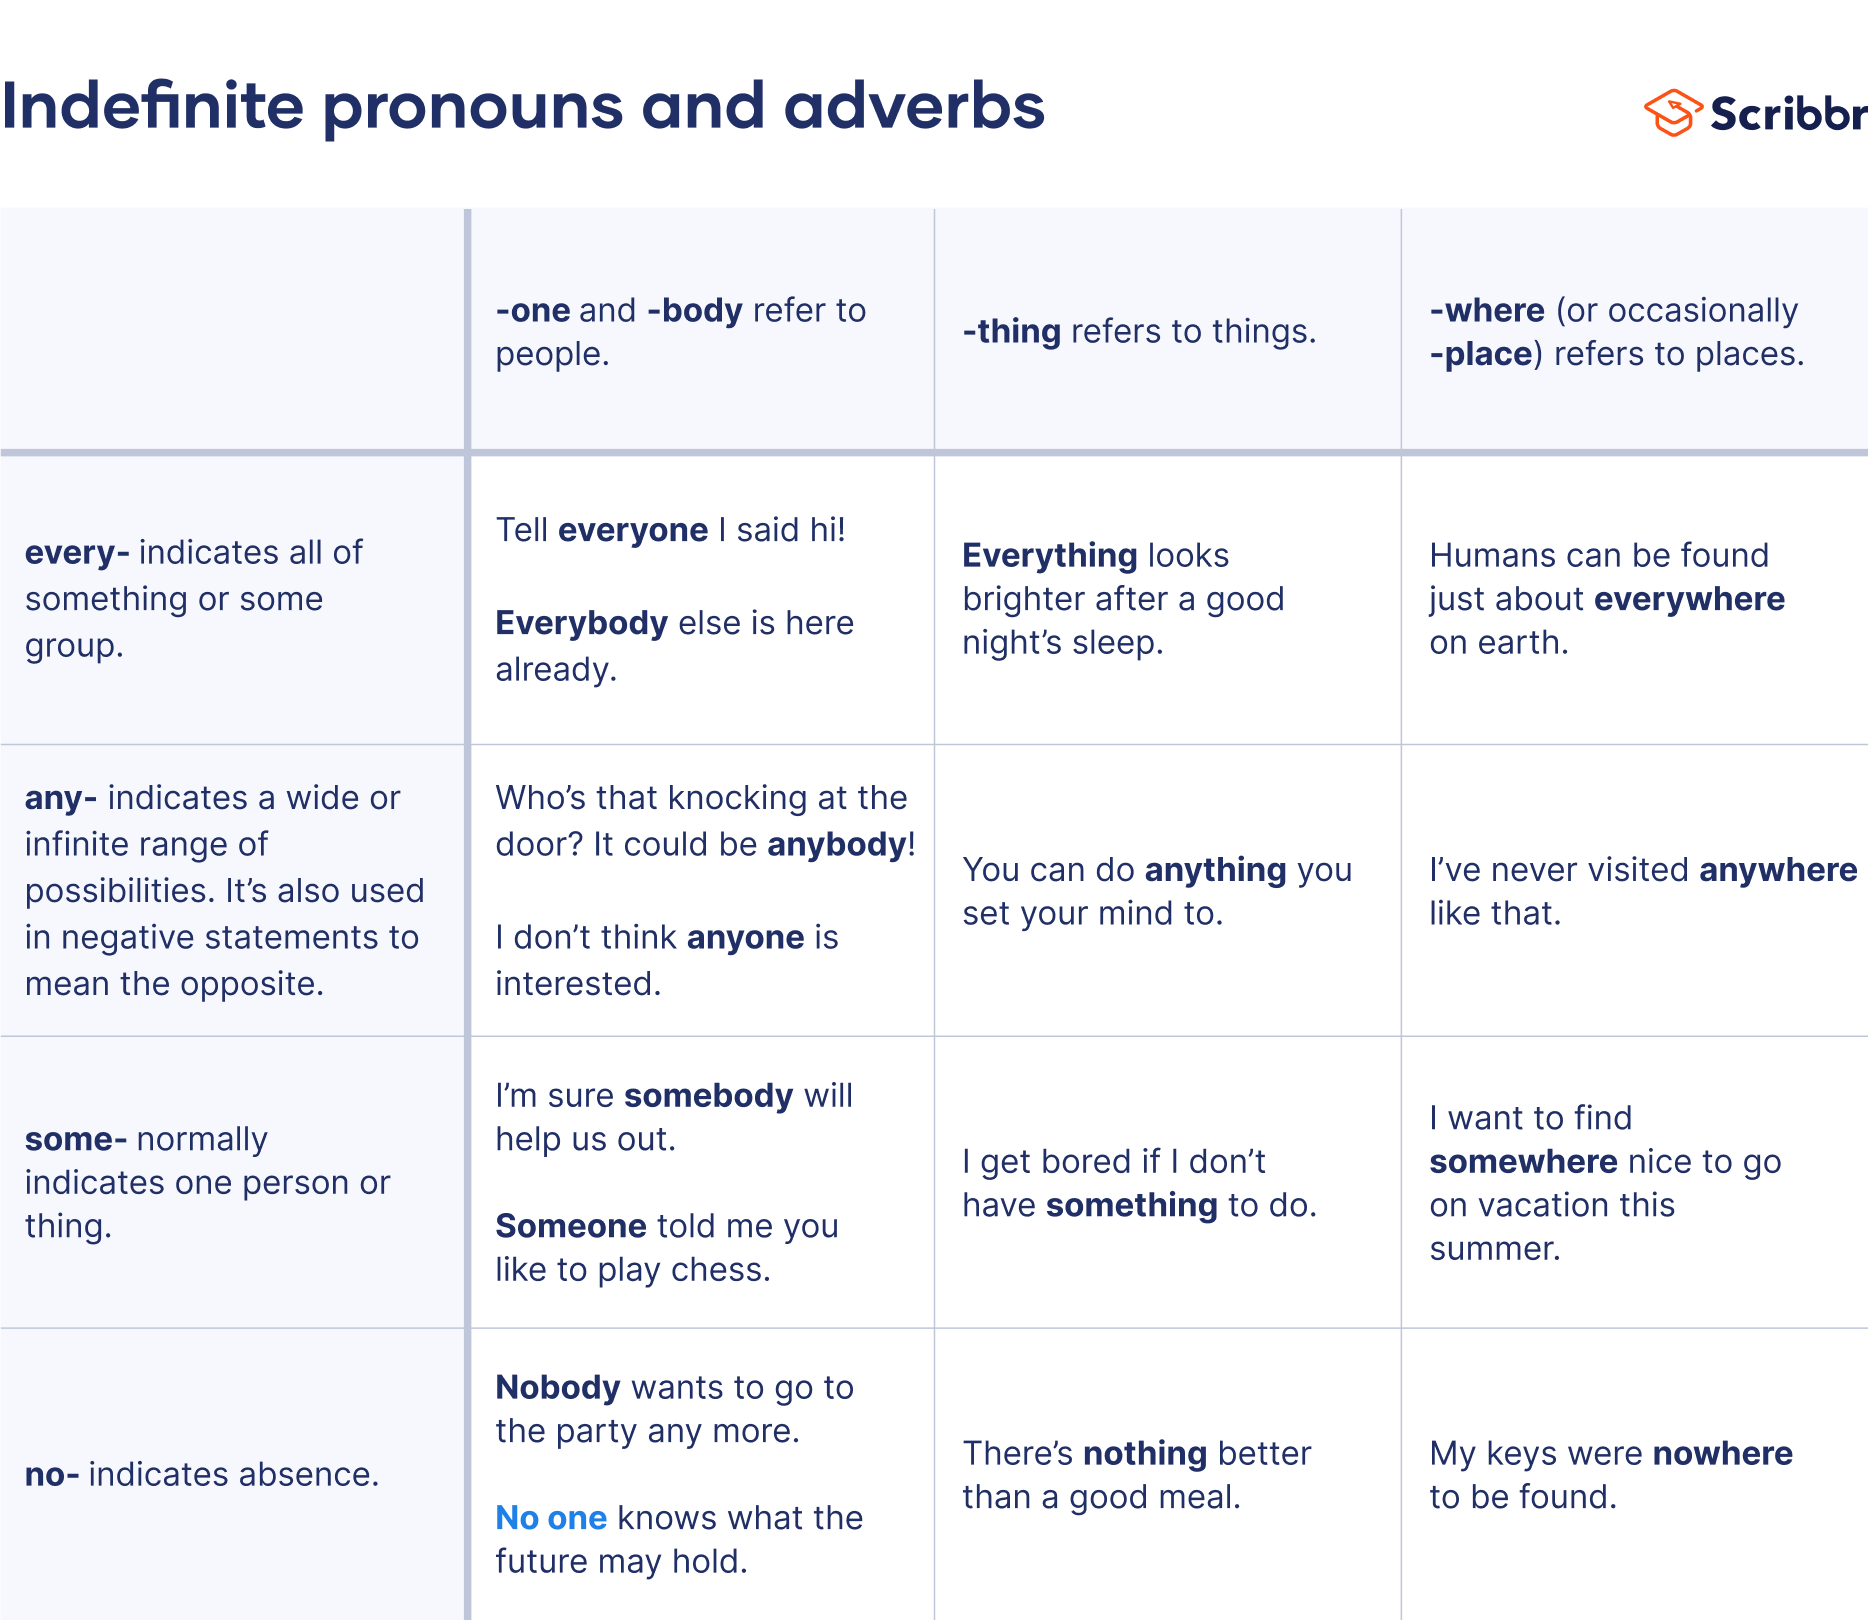 Indefinite pronouns and adverbs